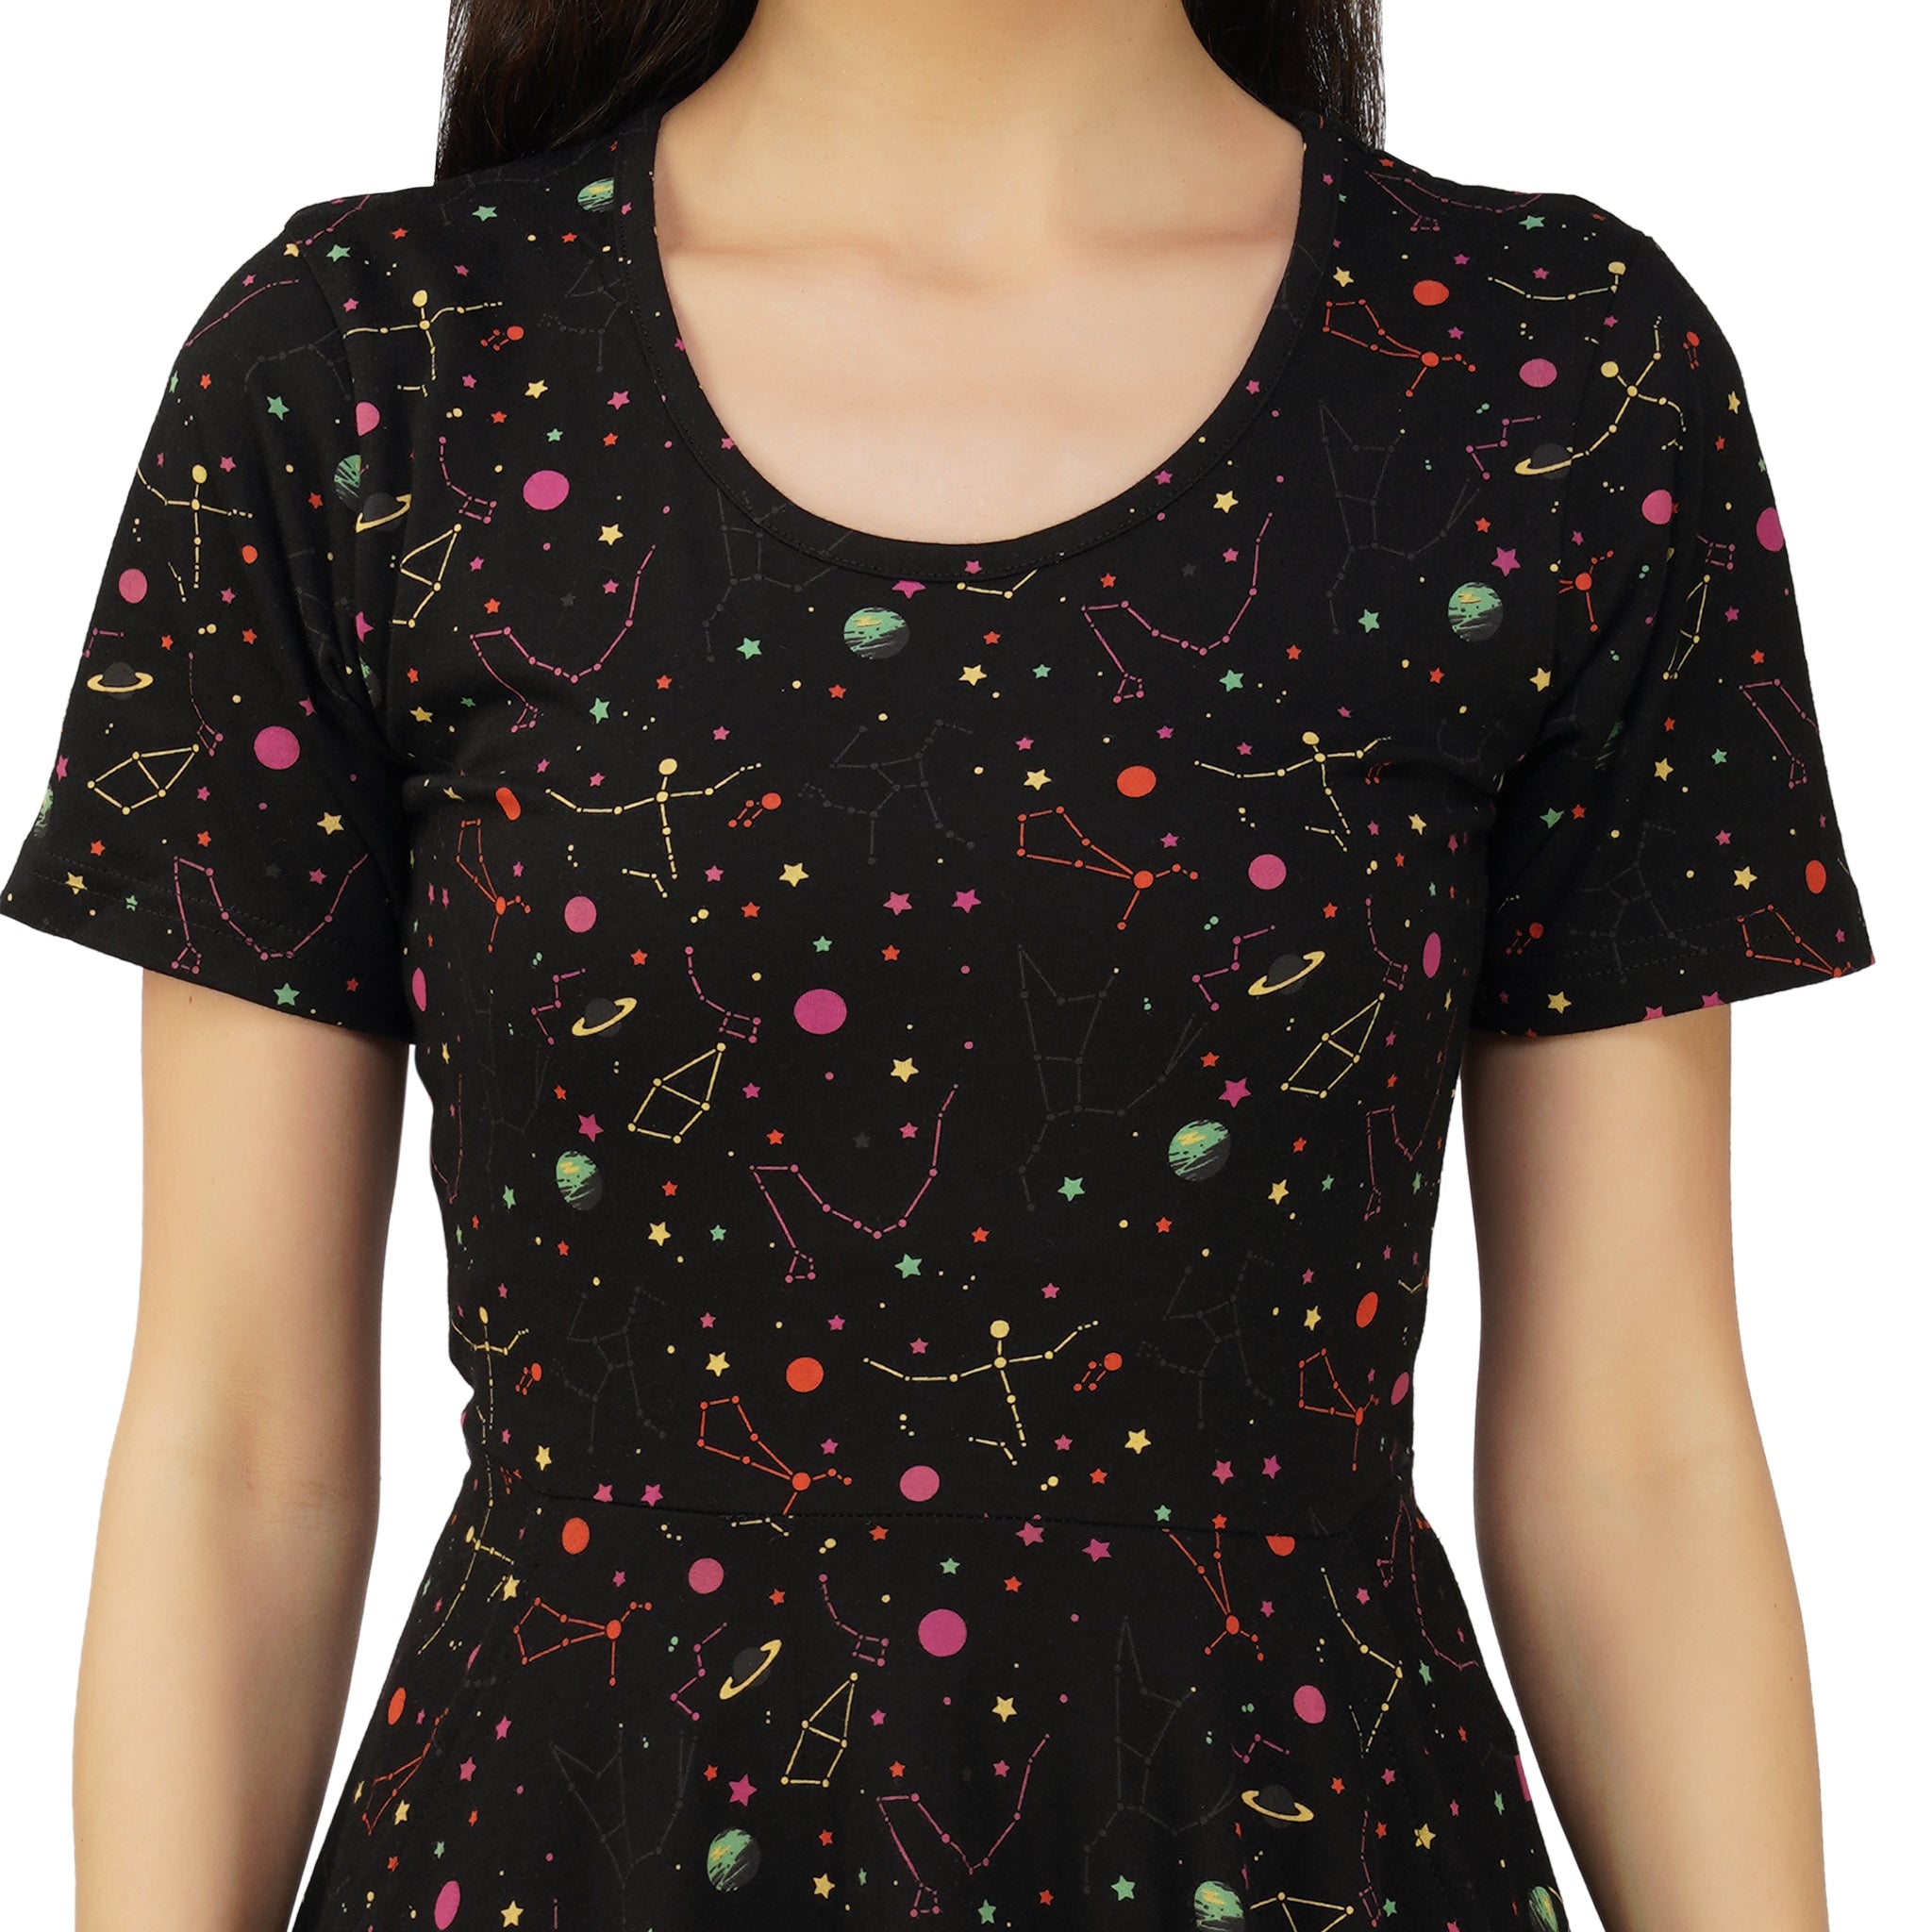 Rainbow Constellations Glow-in-the-Dark Fit & Flare Dress